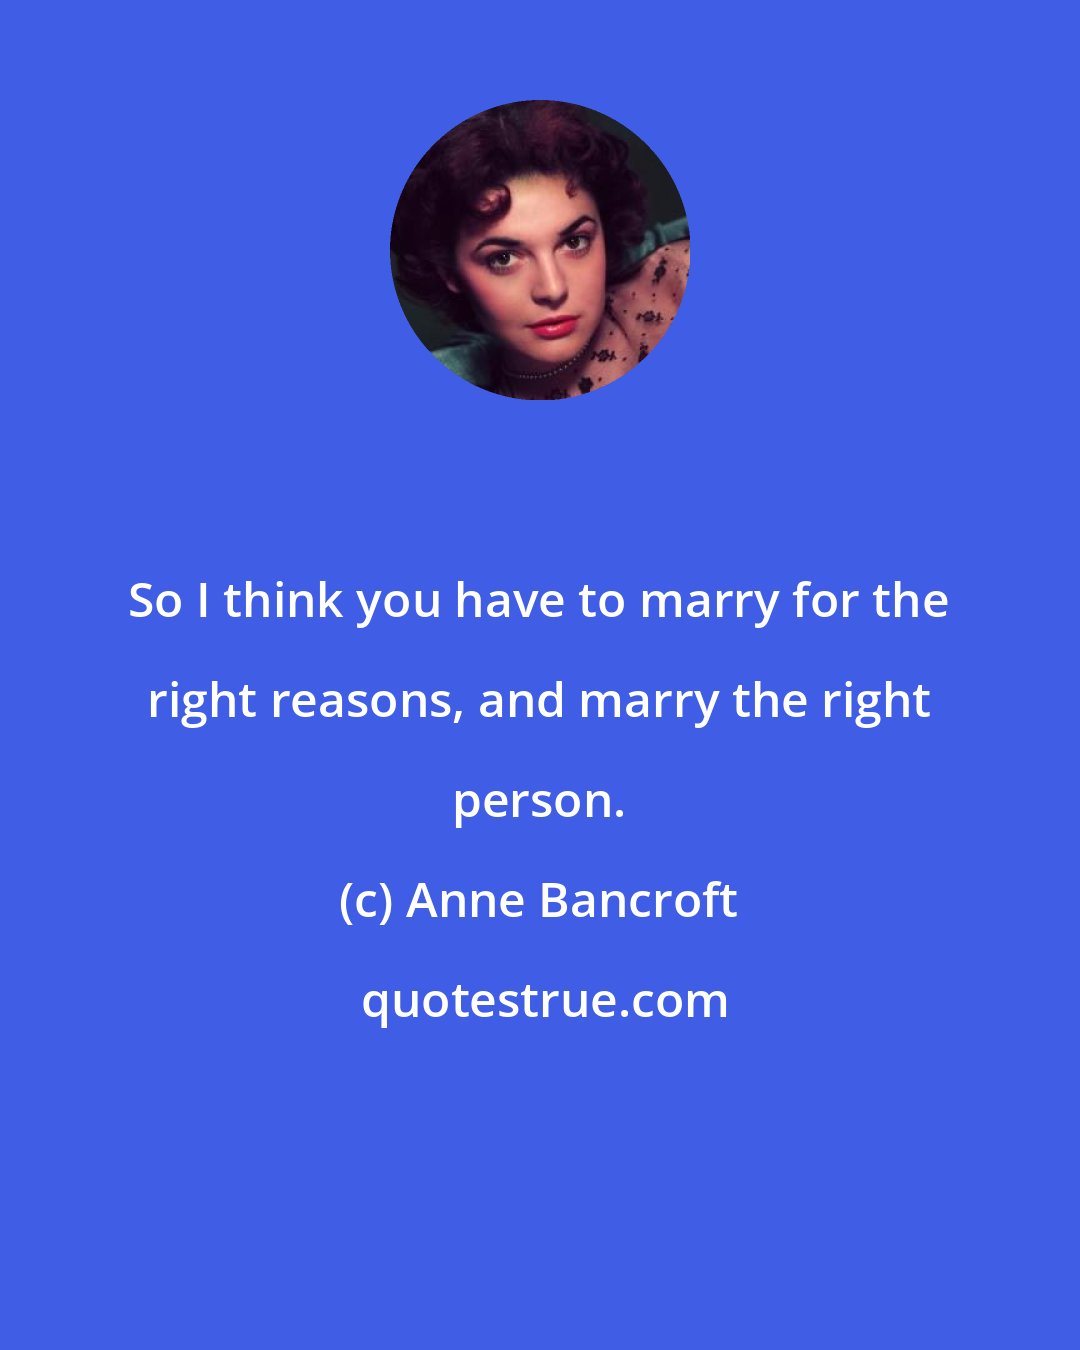 Anne Bancroft: So I think you have to marry for the right reasons, and marry the right person.